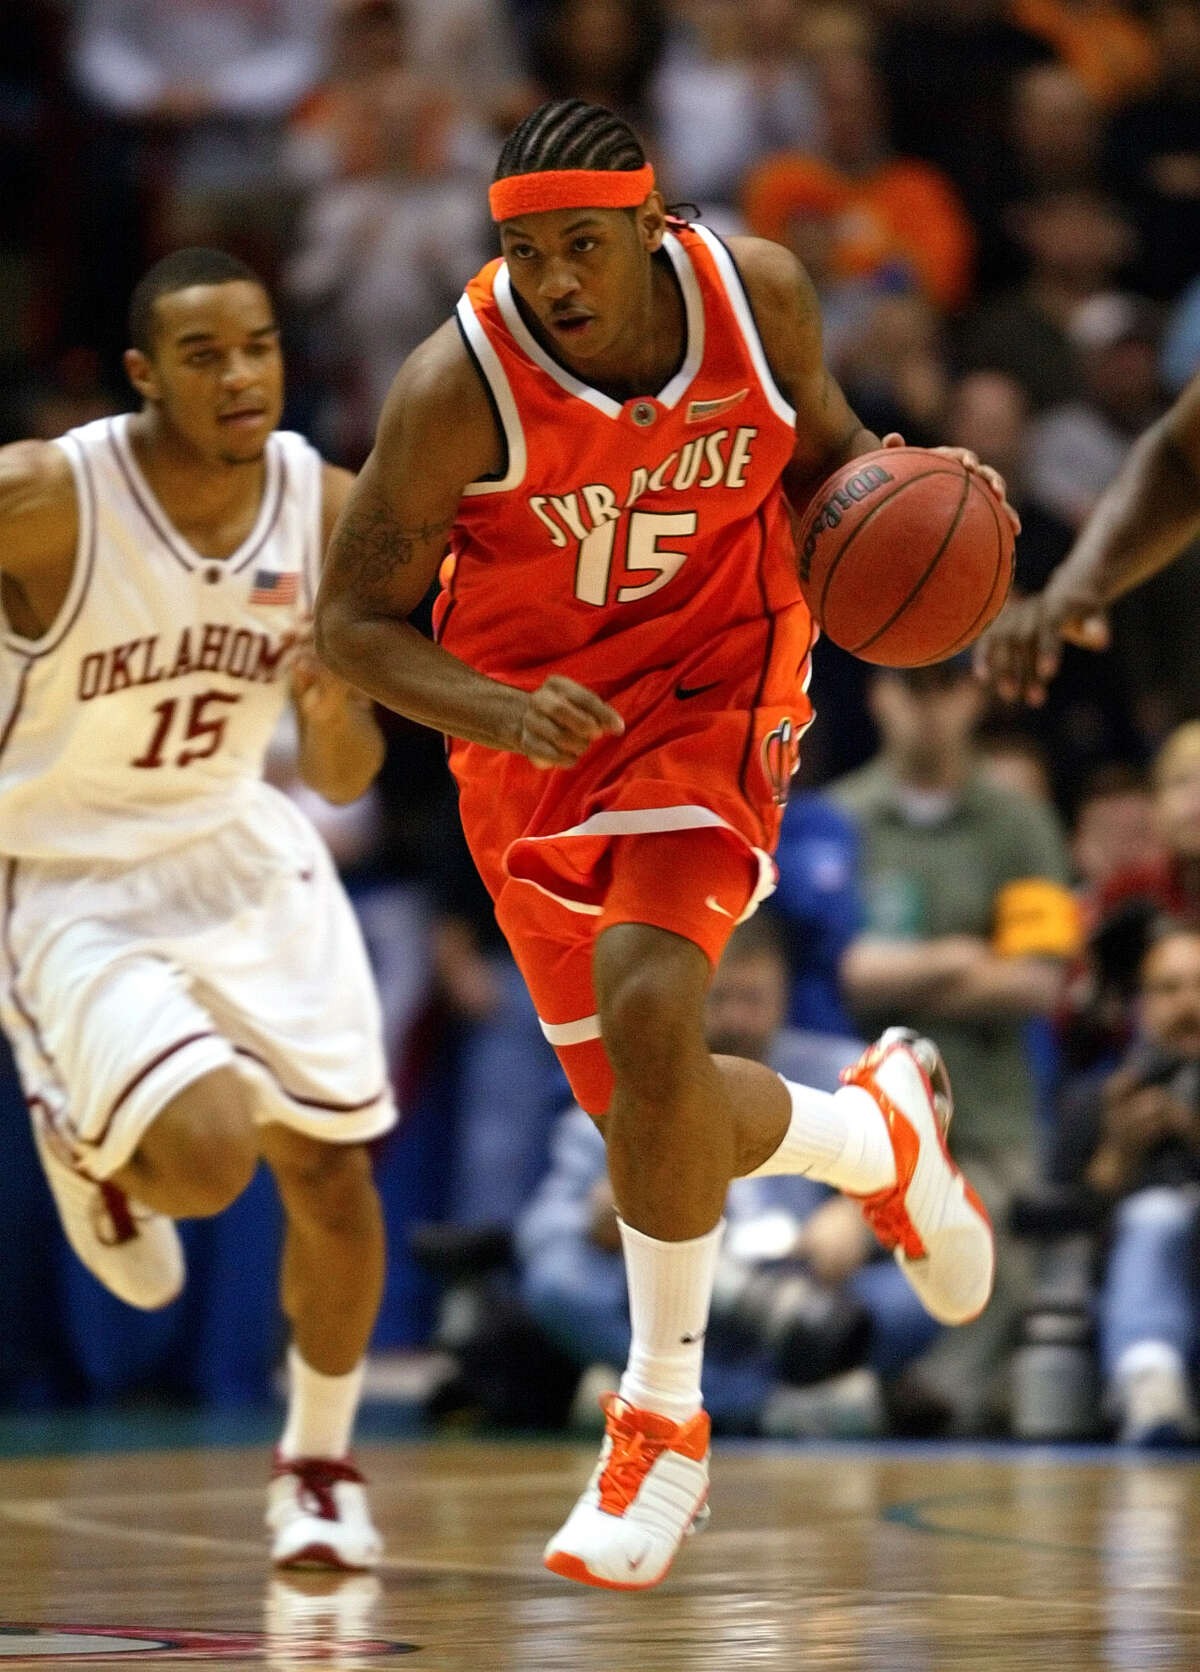 The Times Union Center was host to NCAA Championship events an impressive four consecutive years, and seven events in the new millennium. Syracuse's Carmelo Anthony dribbles the ball upcourt as Oklahoma's De'Angelo Alexander, left, chases during the NCAA men's basketball east regional final in this March 30, 2003. Anthony, who led the Orangemen to their first national championship, says he will forego his final three years of school to play in the National Basketball Association, he announced Thursday, April 24, 2003.